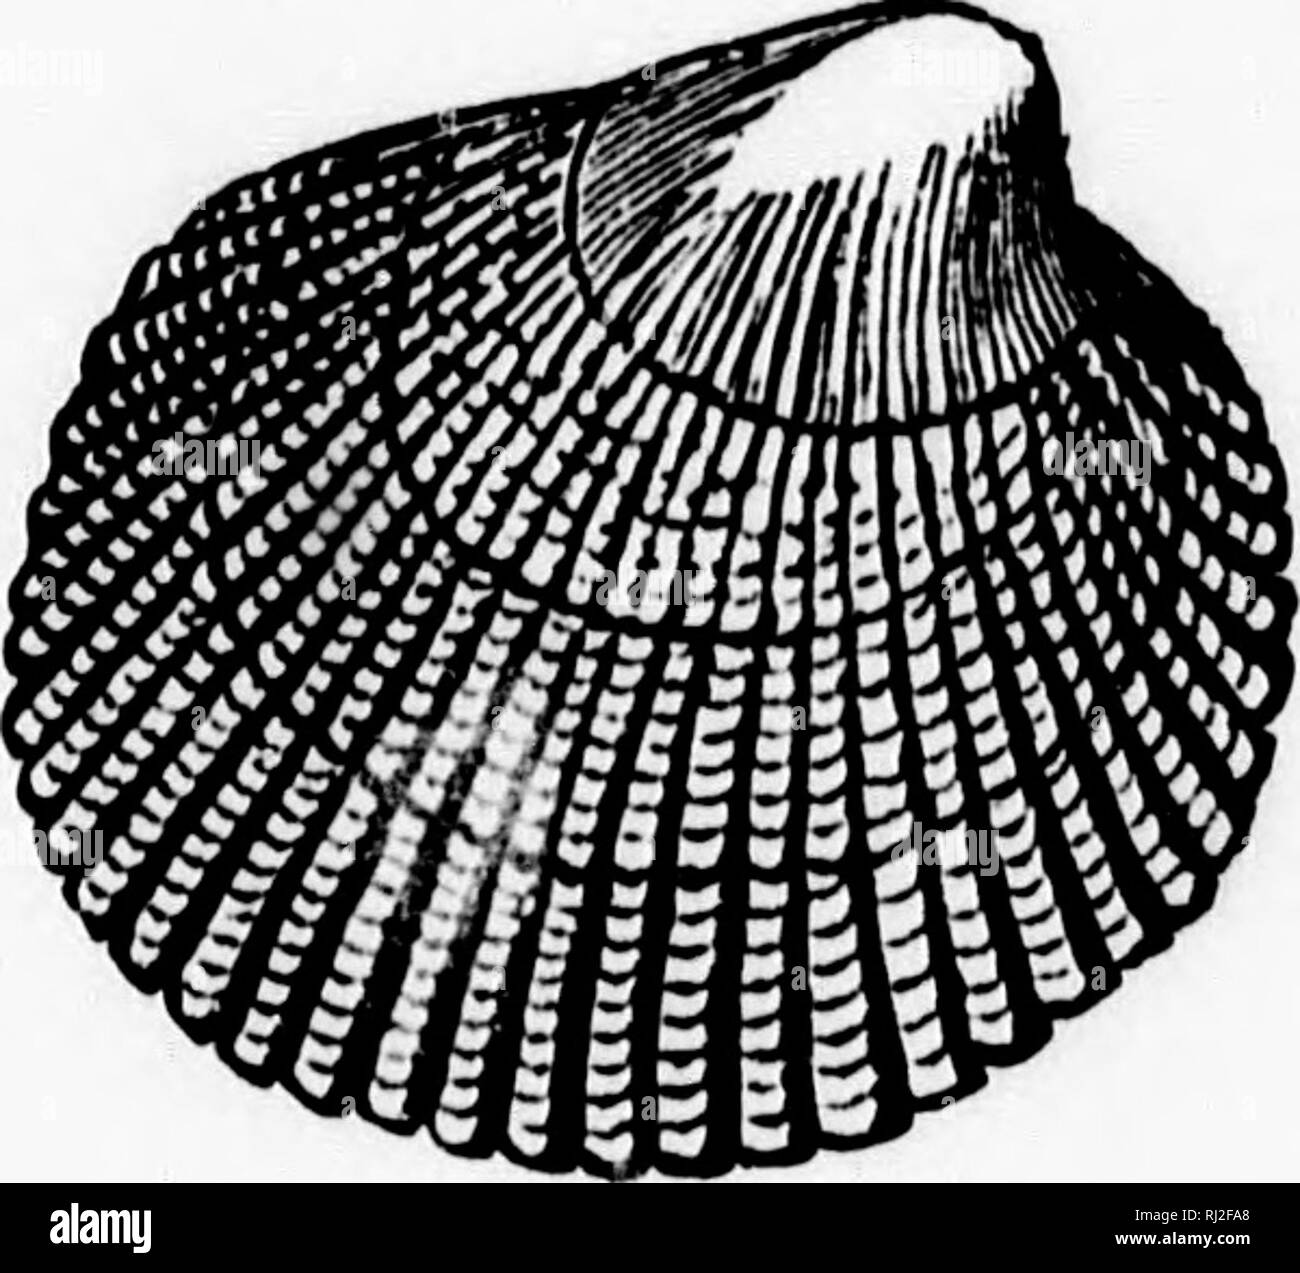 . Handbook of zoology with examples from Canadian species, recent and fossil [microform]. Zoology; Invertebrates; Zoologie; Invertébrés. 138 PROVINCE MOLLUSCA. Cardium Isiandicum is the common cockle of the Gulf St. Lawrence, and Serripes Grocnlandica is also frequent. Fig. Ii5r&gt;,. Fi;;-. I'l.'i.—C lilMI M IHLANUIirM, Lill. T Tridacnidae.—Example : Tridnacna, Ilippopus. Shell regular, equivalve, truncated in front. Tridacna gigas is t. e largest of bivalves. No species occur in Canada. rilPPURlTiDAE.—Example: Ilippurites, Radiolites. Fossil in the Cretaceous rocks ; remark.^l)le for the gr Stock Photo